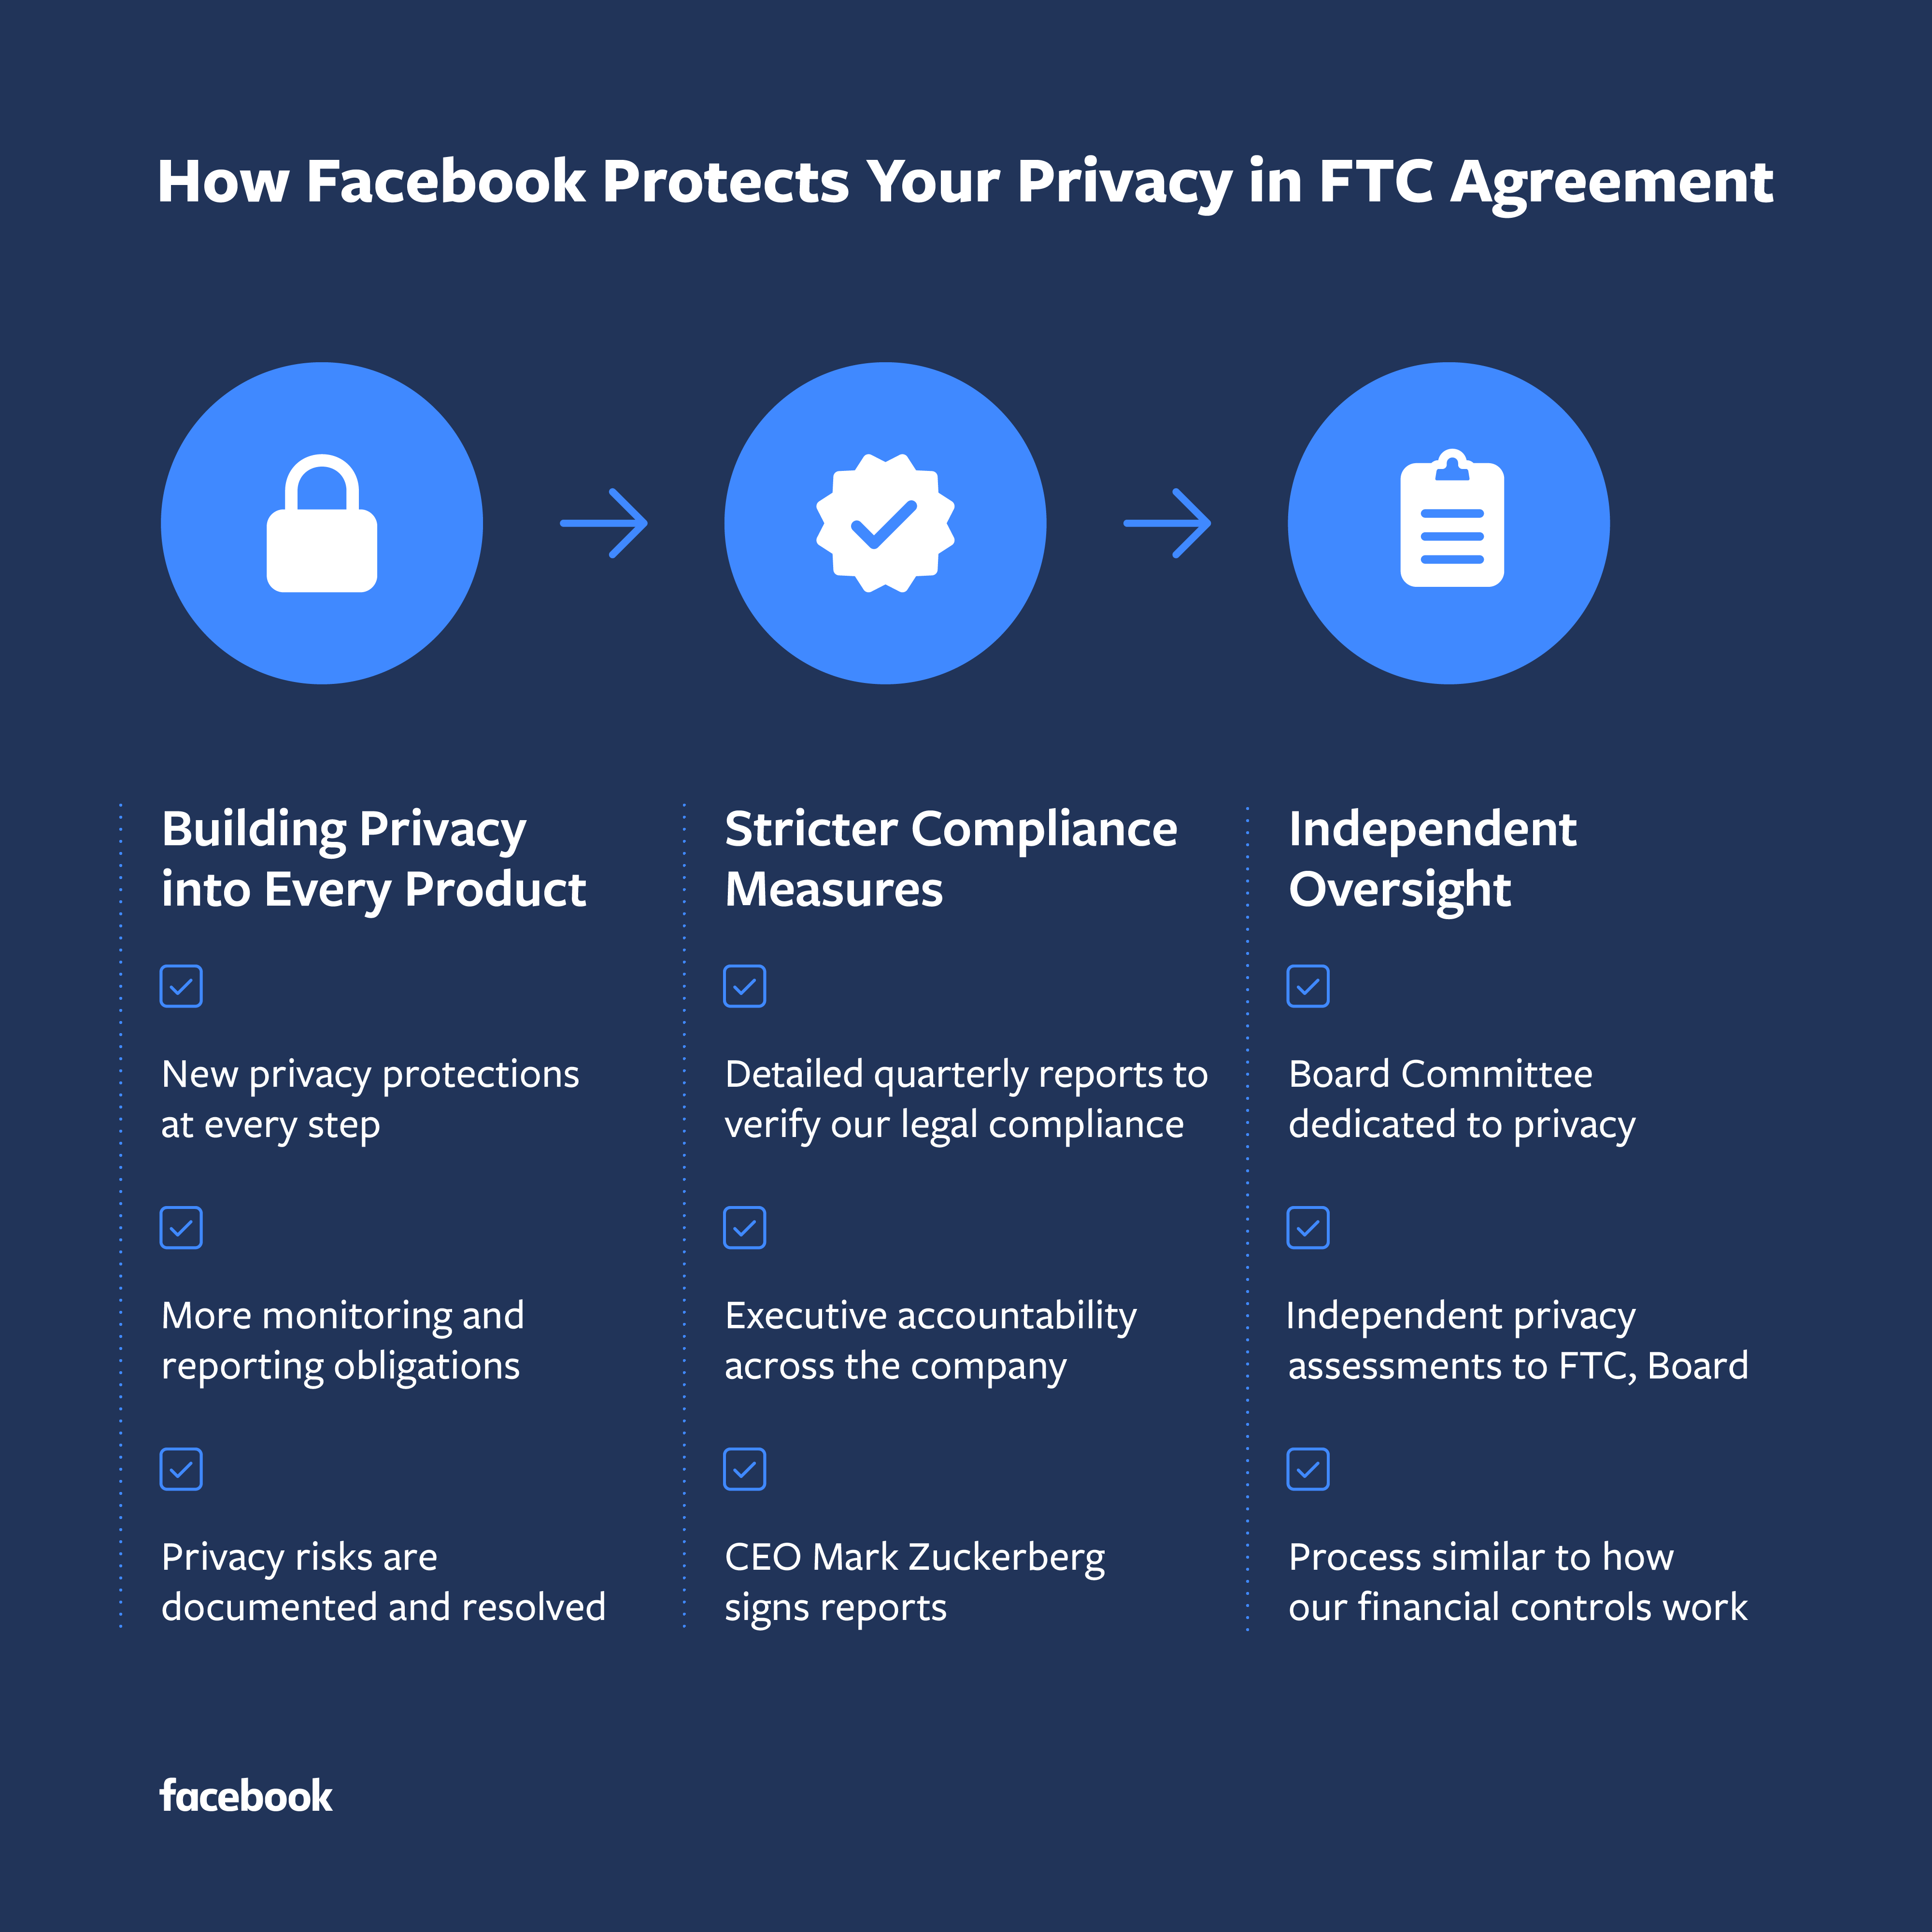 Ftc Agreement Brings Rigorous New Standards For Protecting Your Privacy About Facebook